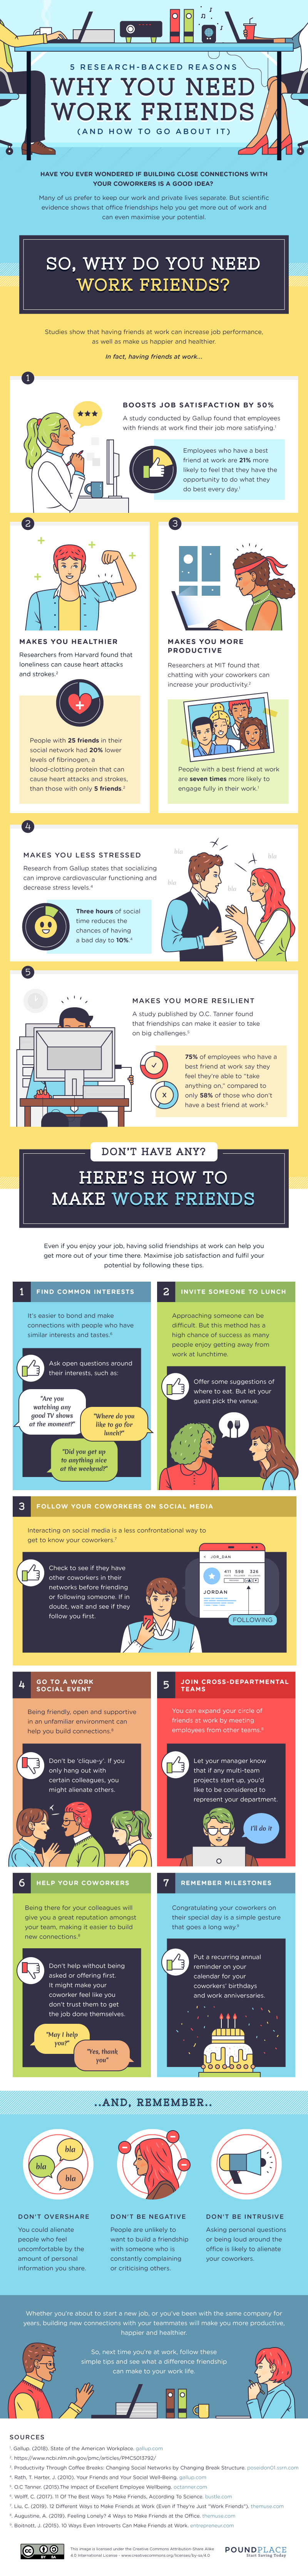 5-research-backed-reasons-why-you-need-work-friends